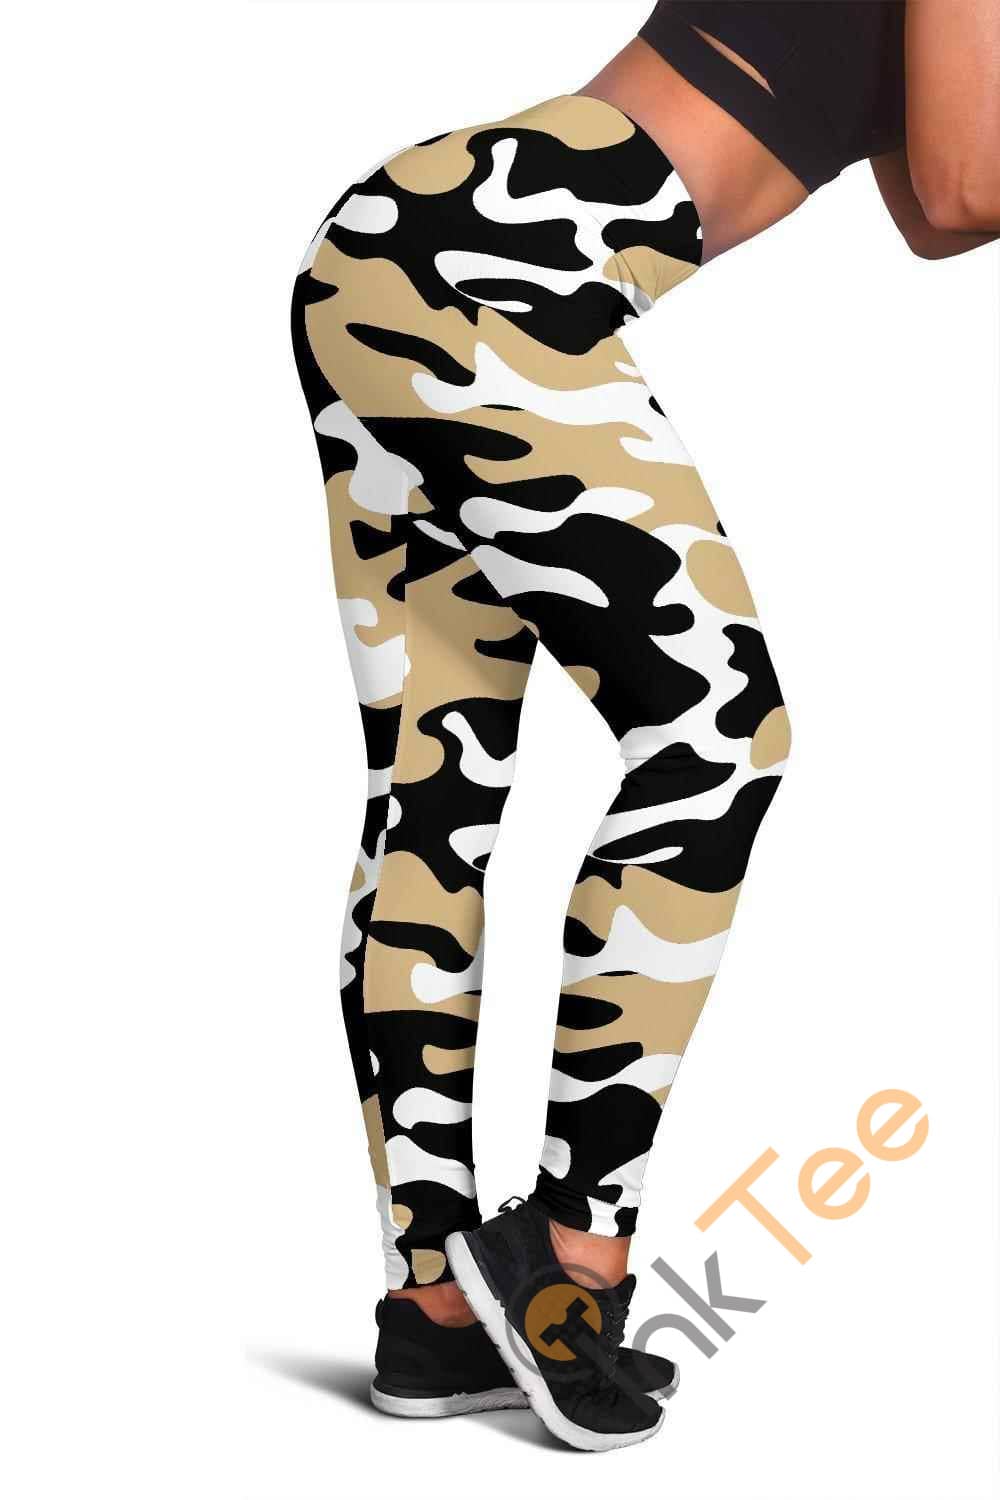 Inktee Store - New Orleans Saints Inspired Tru Camo 3D All Over Print For Yoga Fitness Fashion Women'S Leggings Image